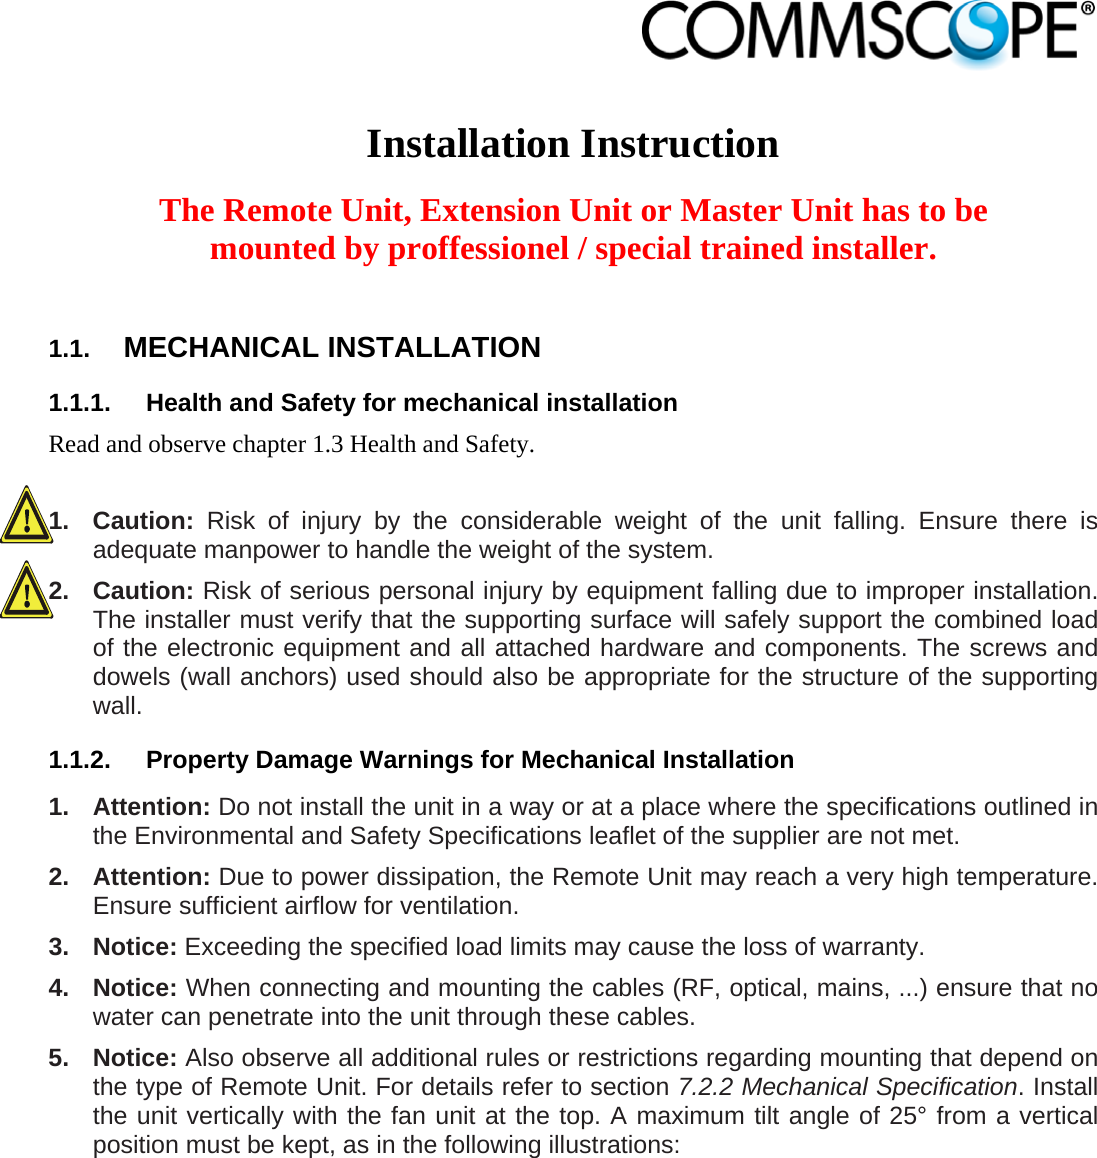                             Installation Instruction  The Remote Unit, Extension Unit or Master Unit has to be mounted by proffessionel / special trained installer.  1.1.  MECHANICAL INSTALLATION 1.1.1.  Health and Safety for mechanical installation Read and observe chapter 1.3 Health and Safety.  1. Caution: Risk of injury by the considerable weight of the unit falling. Ensure there is adequate manpower to handle the weight of the system. 2. Caution: Risk of serious personal injury by equipment falling due to improper installation. The installer must verify that the supporting surface will safely support the combined load of the electronic equipment and all attached hardware and components. The screws and dowels (wall anchors) used should also be appropriate for the structure of the supporting wall. 1.1.2.  Property Damage Warnings for Mechanical Installation 1. Attention: Do not install the unit in a way or at a place where the specifications outlined in the Environmental and Safety Specifications leaflet of the supplier are not met. 2. Attention: Due to power dissipation, the Remote Unit may reach a very high temperature. Ensure sufficient airflow for ventilation. 3. Notice: Exceeding the specified load limits may cause the loss of warranty. 4. Notice: When connecting and mounting the cables (RF, optical, mains, ...) ensure that no water can penetrate into the unit through these cables. 5. Notice: Also observe all additional rules or restrictions regarding mounting that depend on the type of Remote Unit. For details refer to section 7.2.2 Mechanical Specification. Install the unit vertically with the fan unit at the top. A maximum tilt angle of 25° from a vertical position must be kept, as in the following illustrations: 